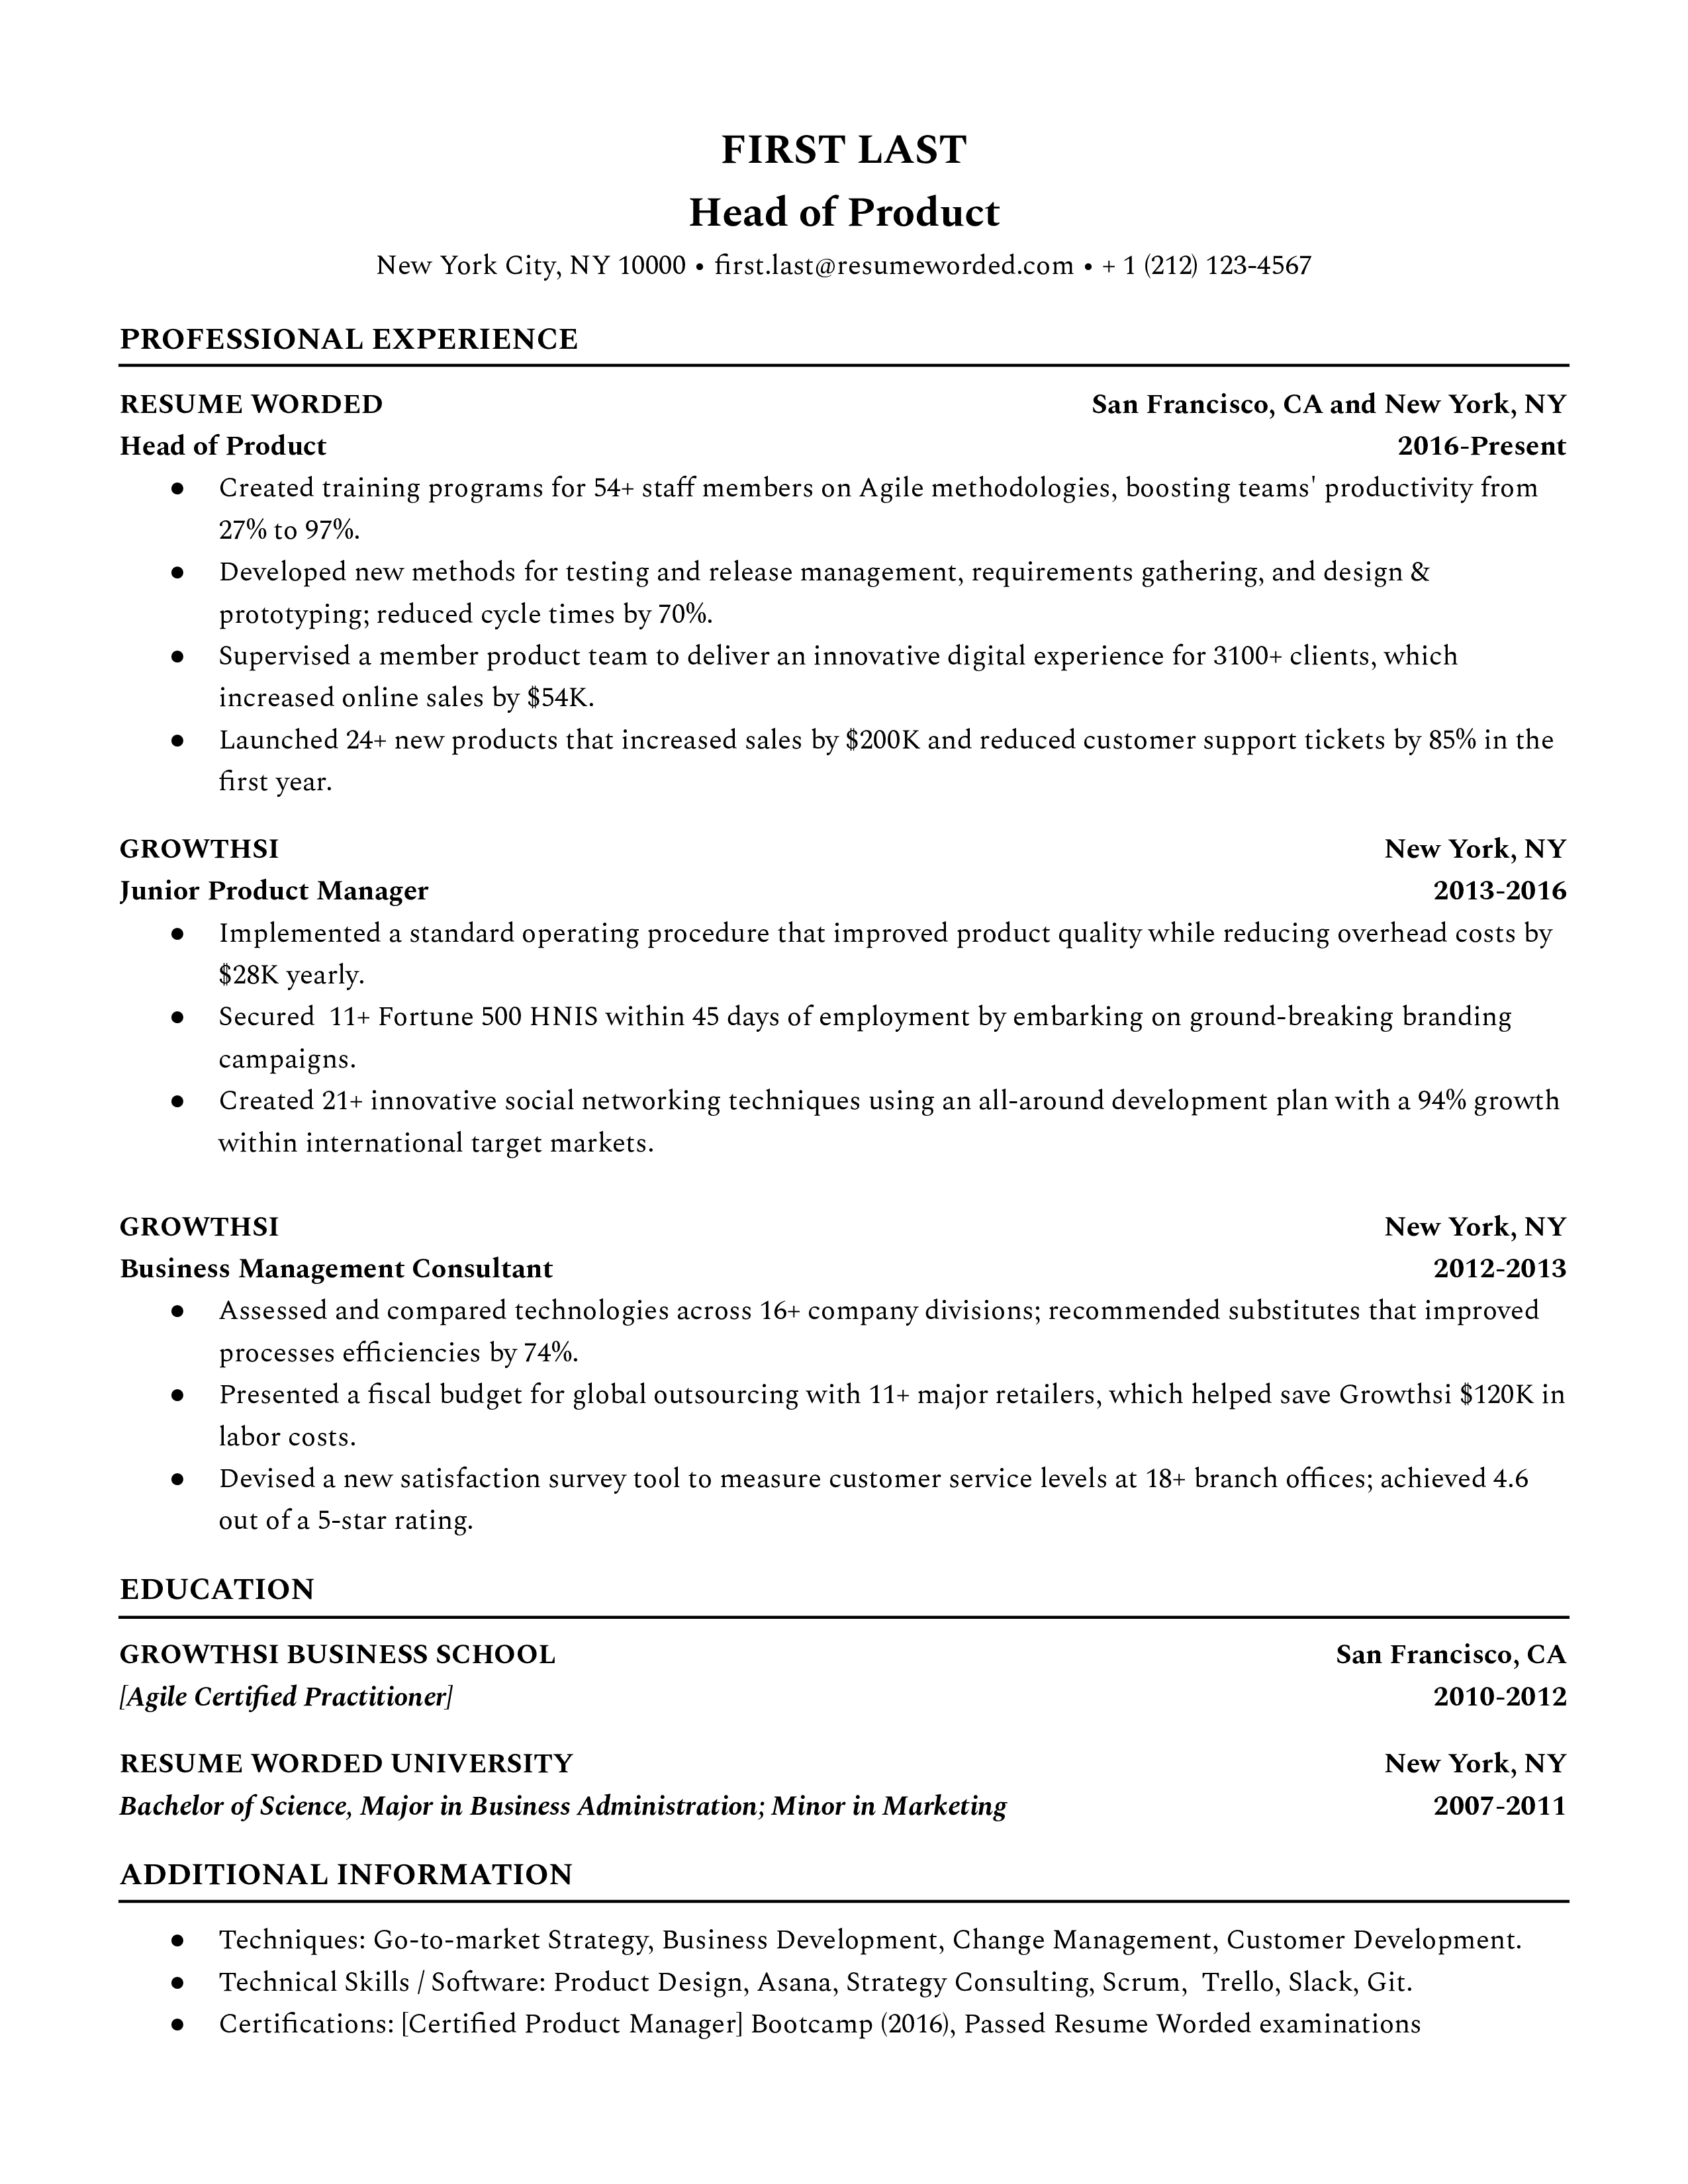 A head-of-product resume sample that highlights the candidate’s relevant certifications and management style.